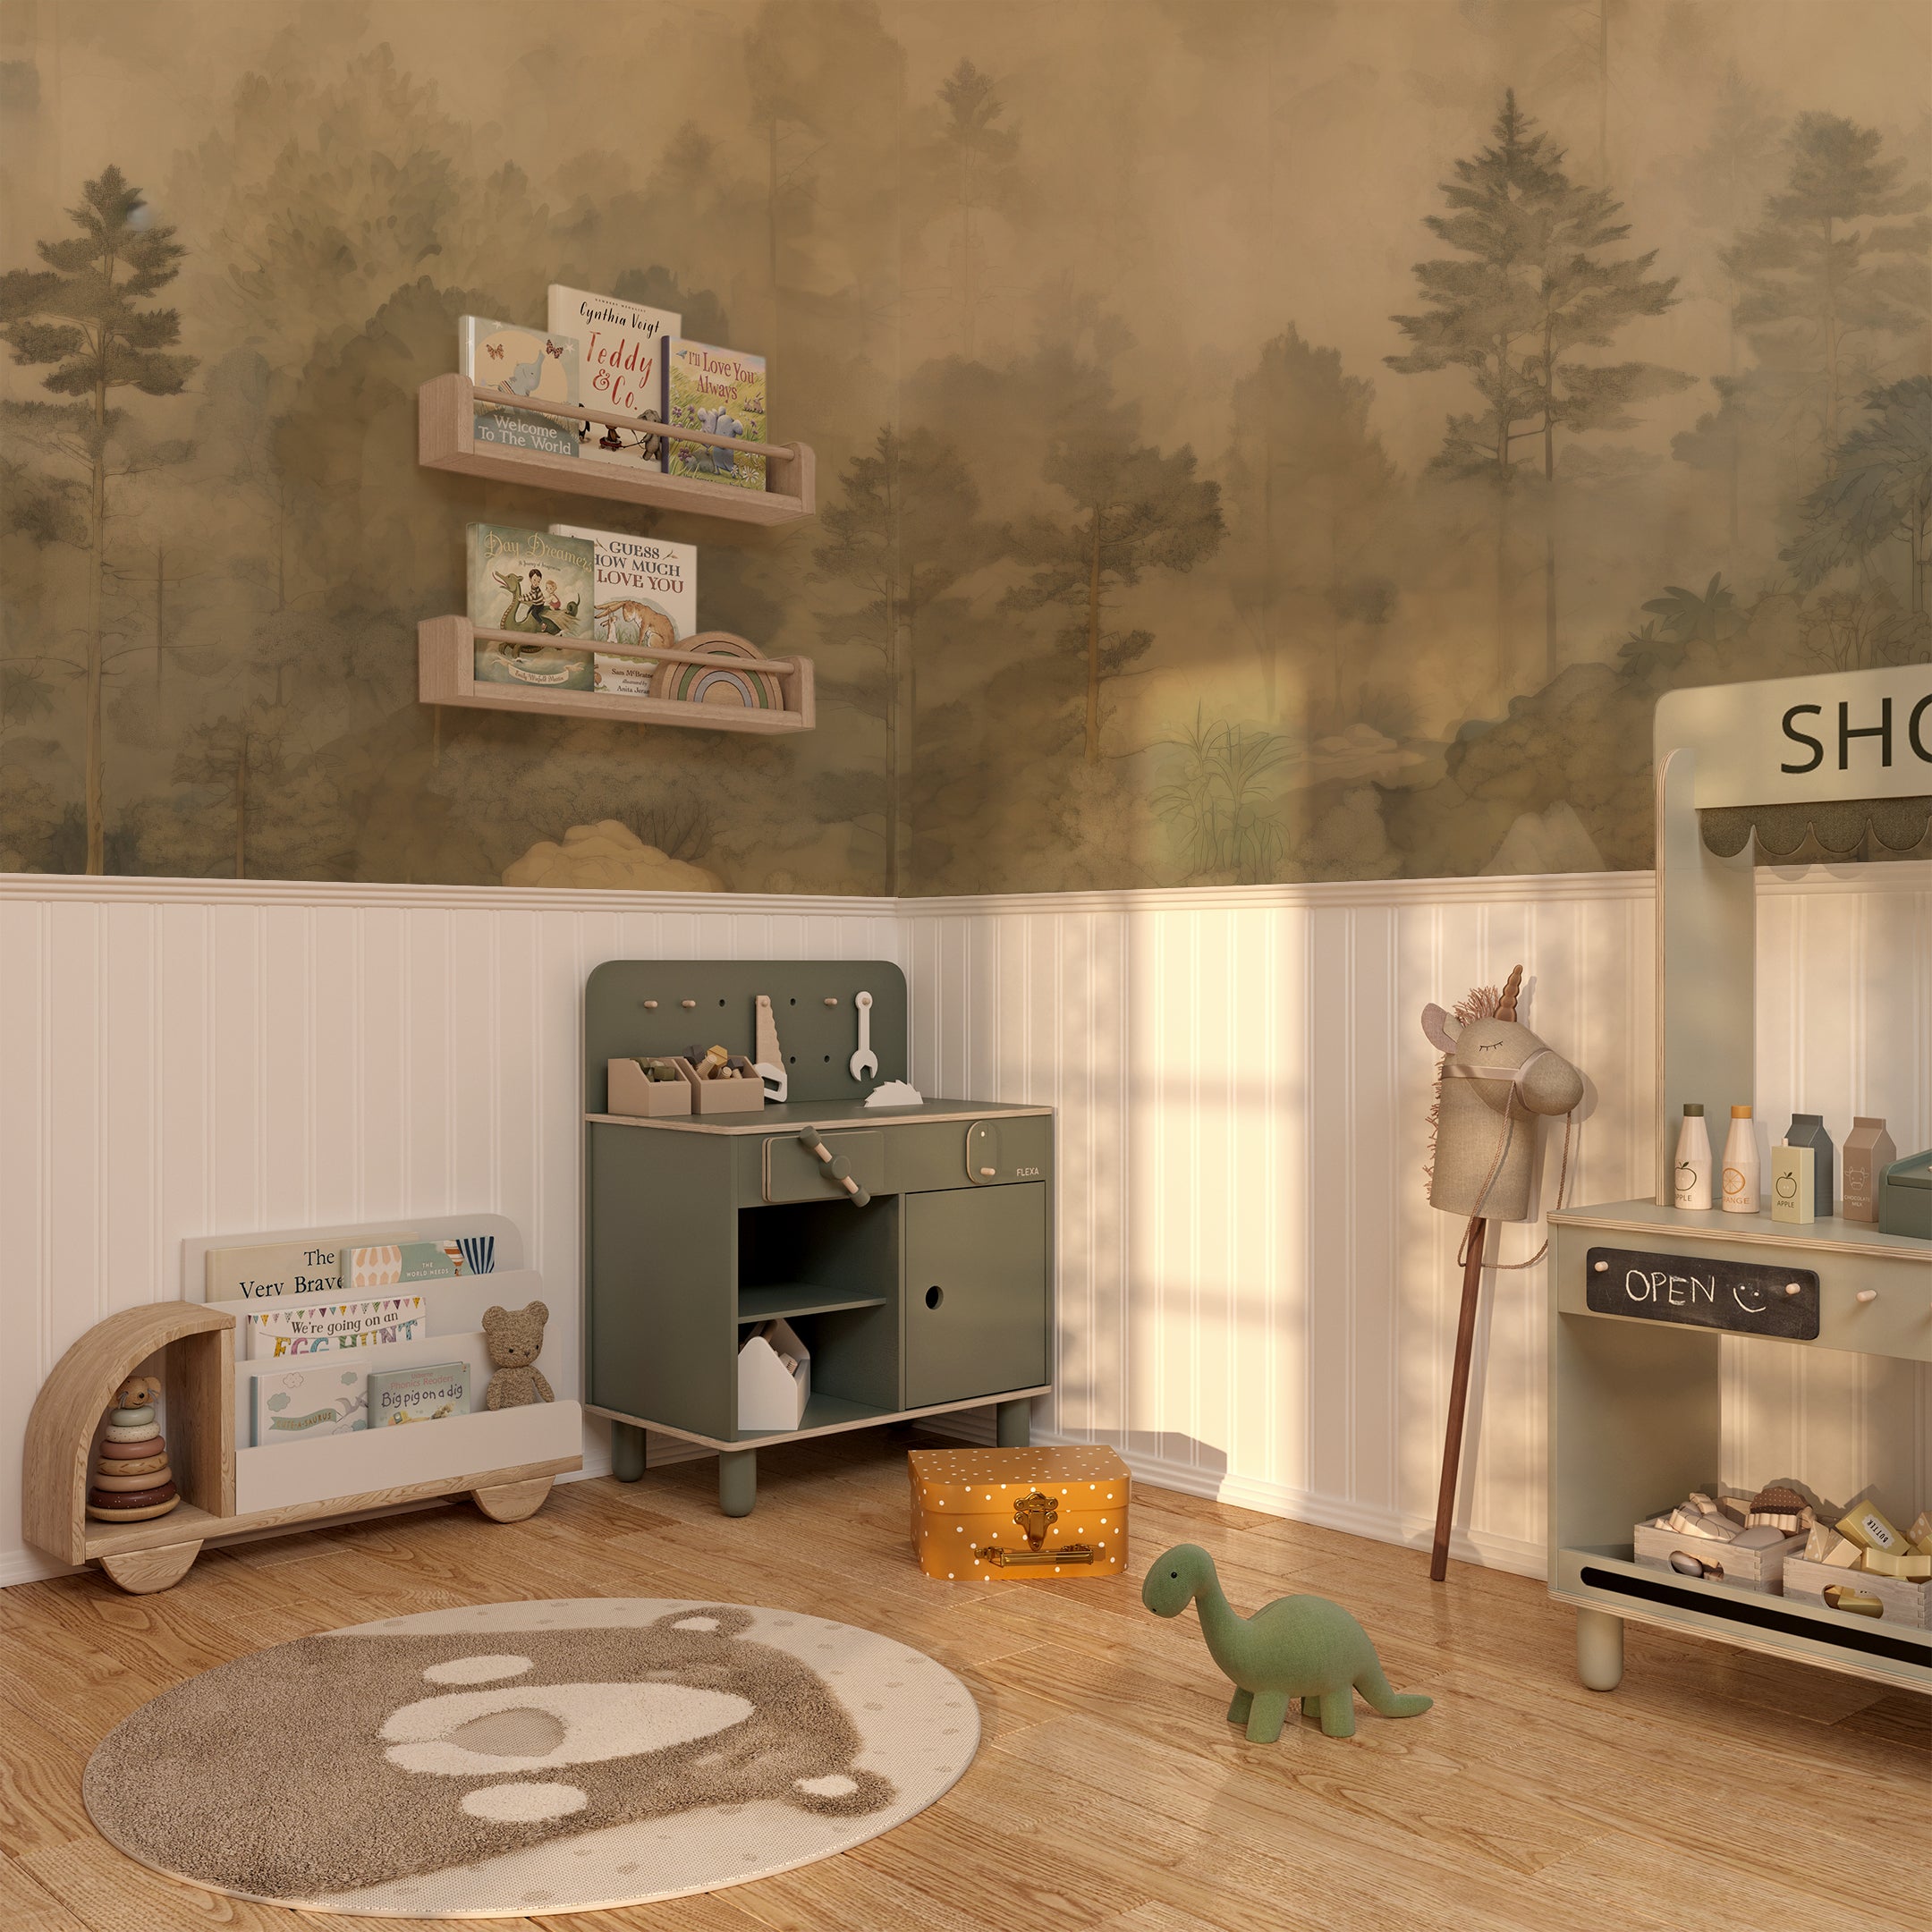 Children's room featuring Algonquin mural on the wall, complemented by soft toy decorations and wooden furniture.